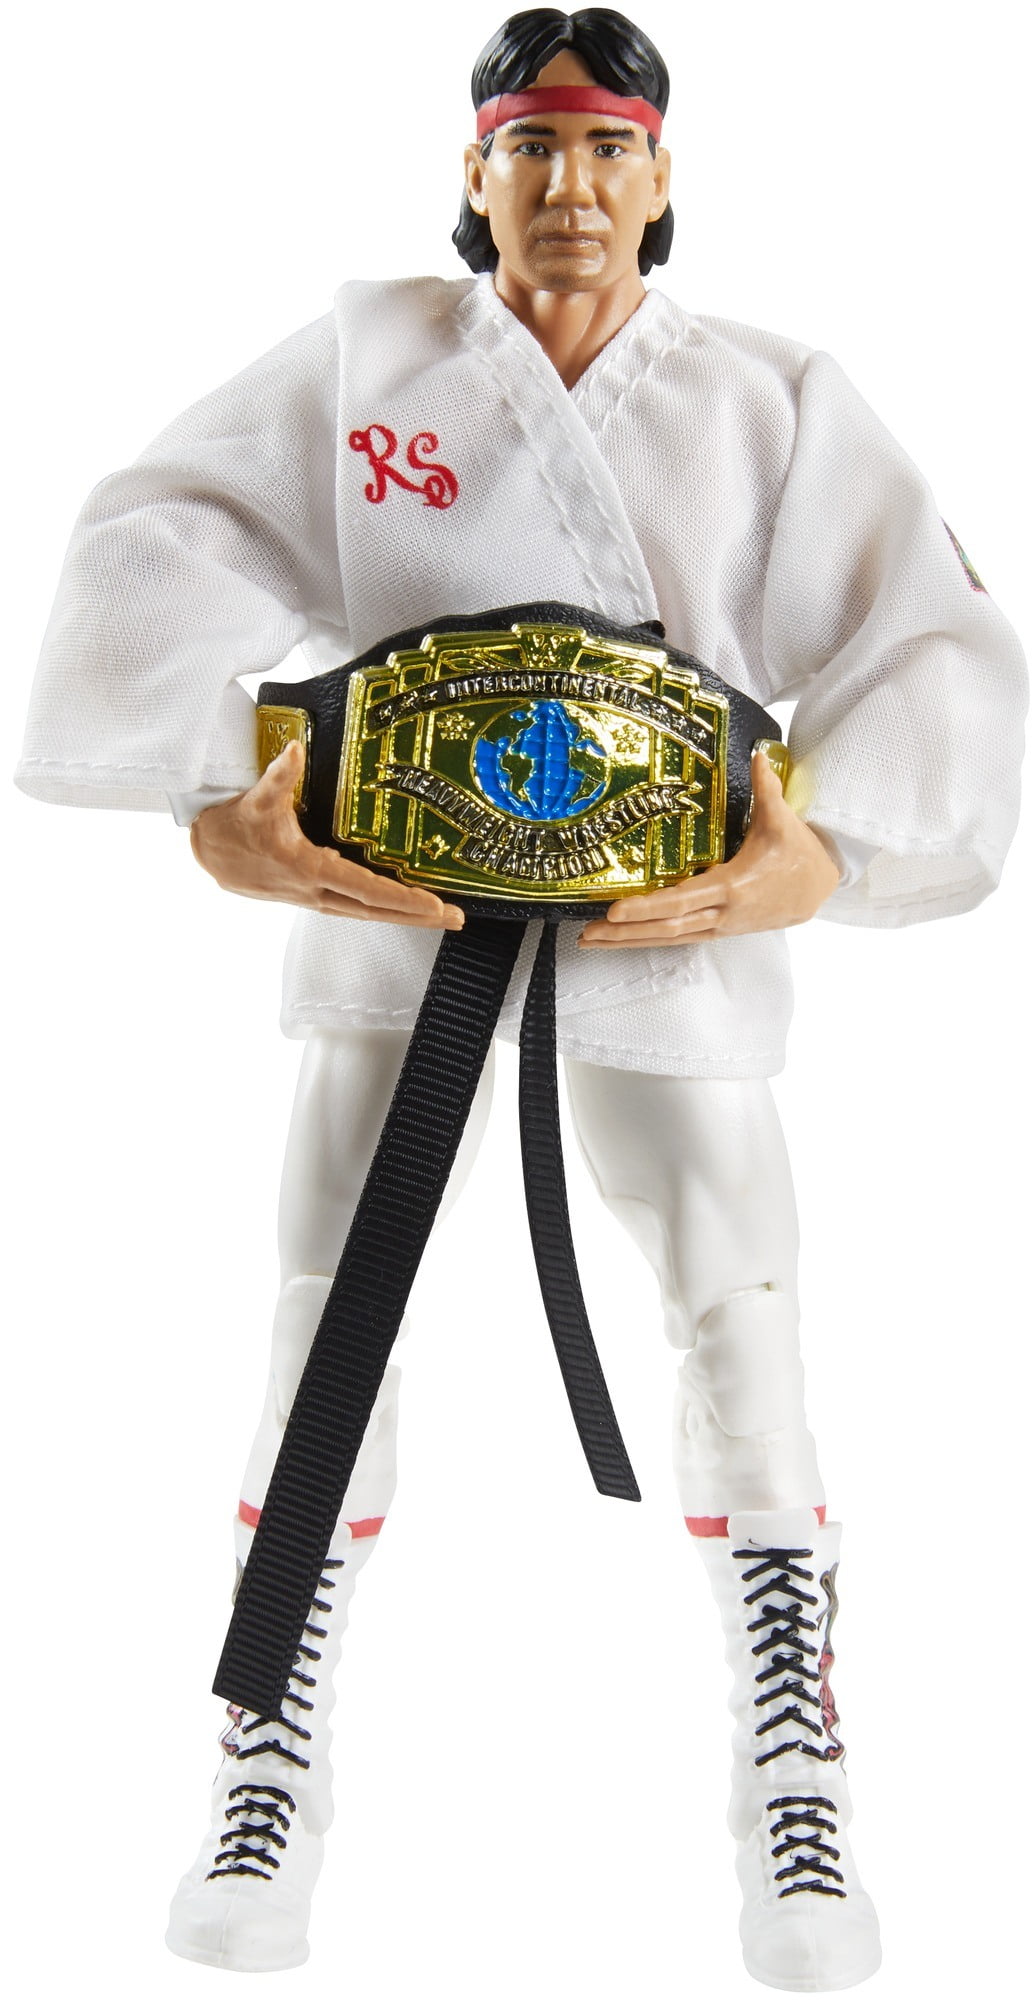 WWE Elite RICKY STEAMBOAT Figure "THE DRAGON" FAN TAKEOVER SERIES  EXCLUSIVE US 